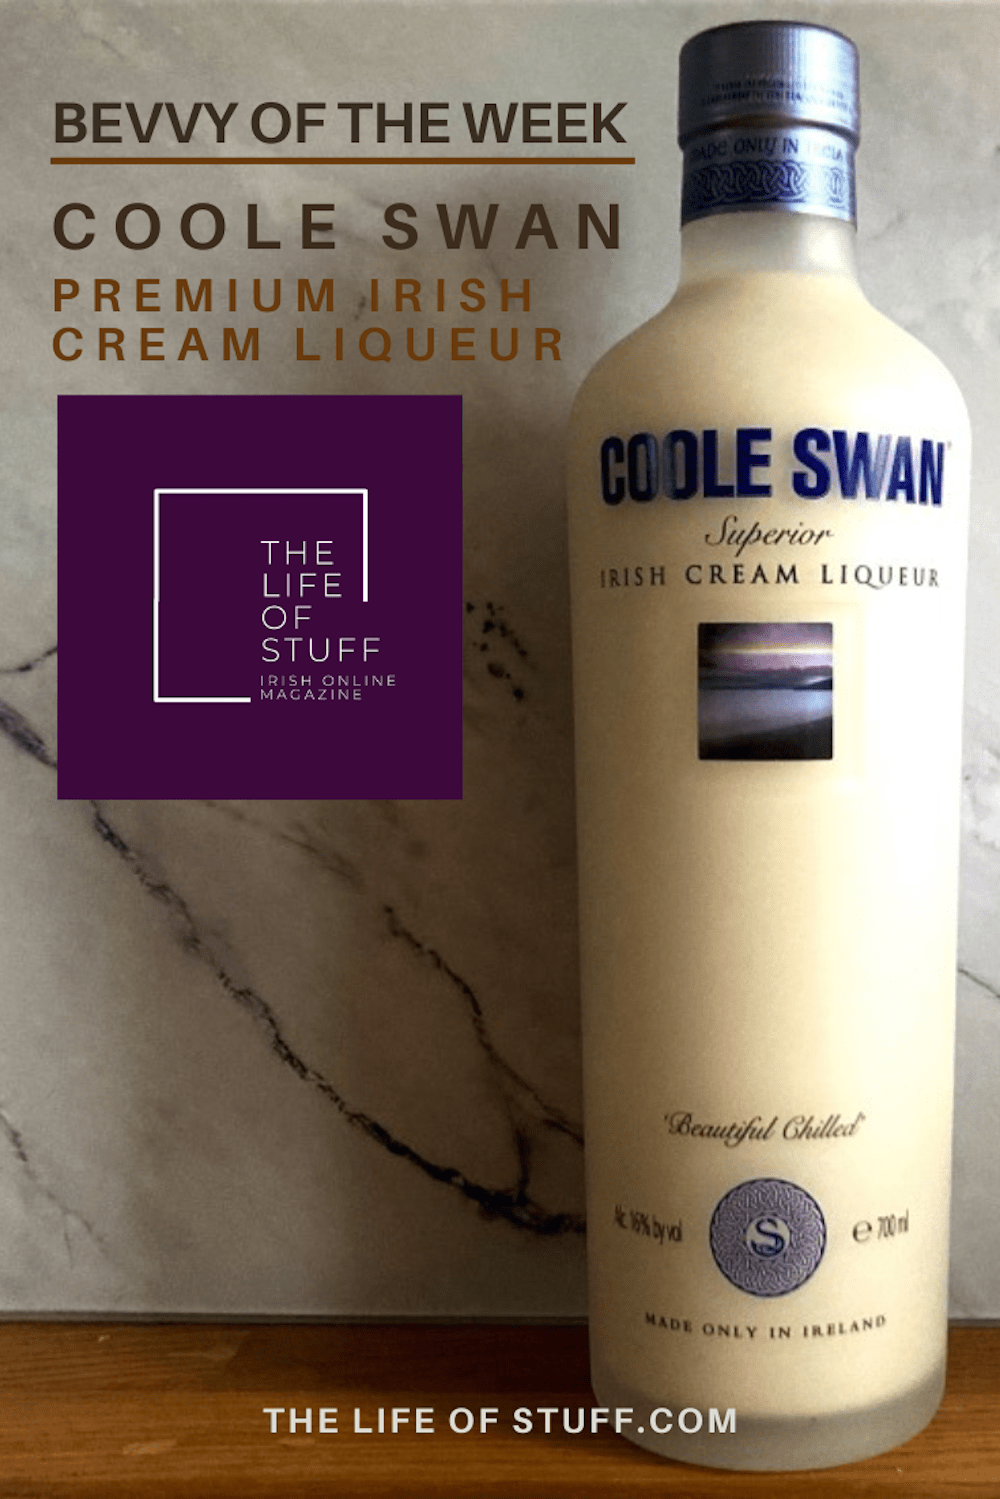 Bevvy of the Week - Coole Swan - Premium Irish Cream Liqueur on The Life of Stuff